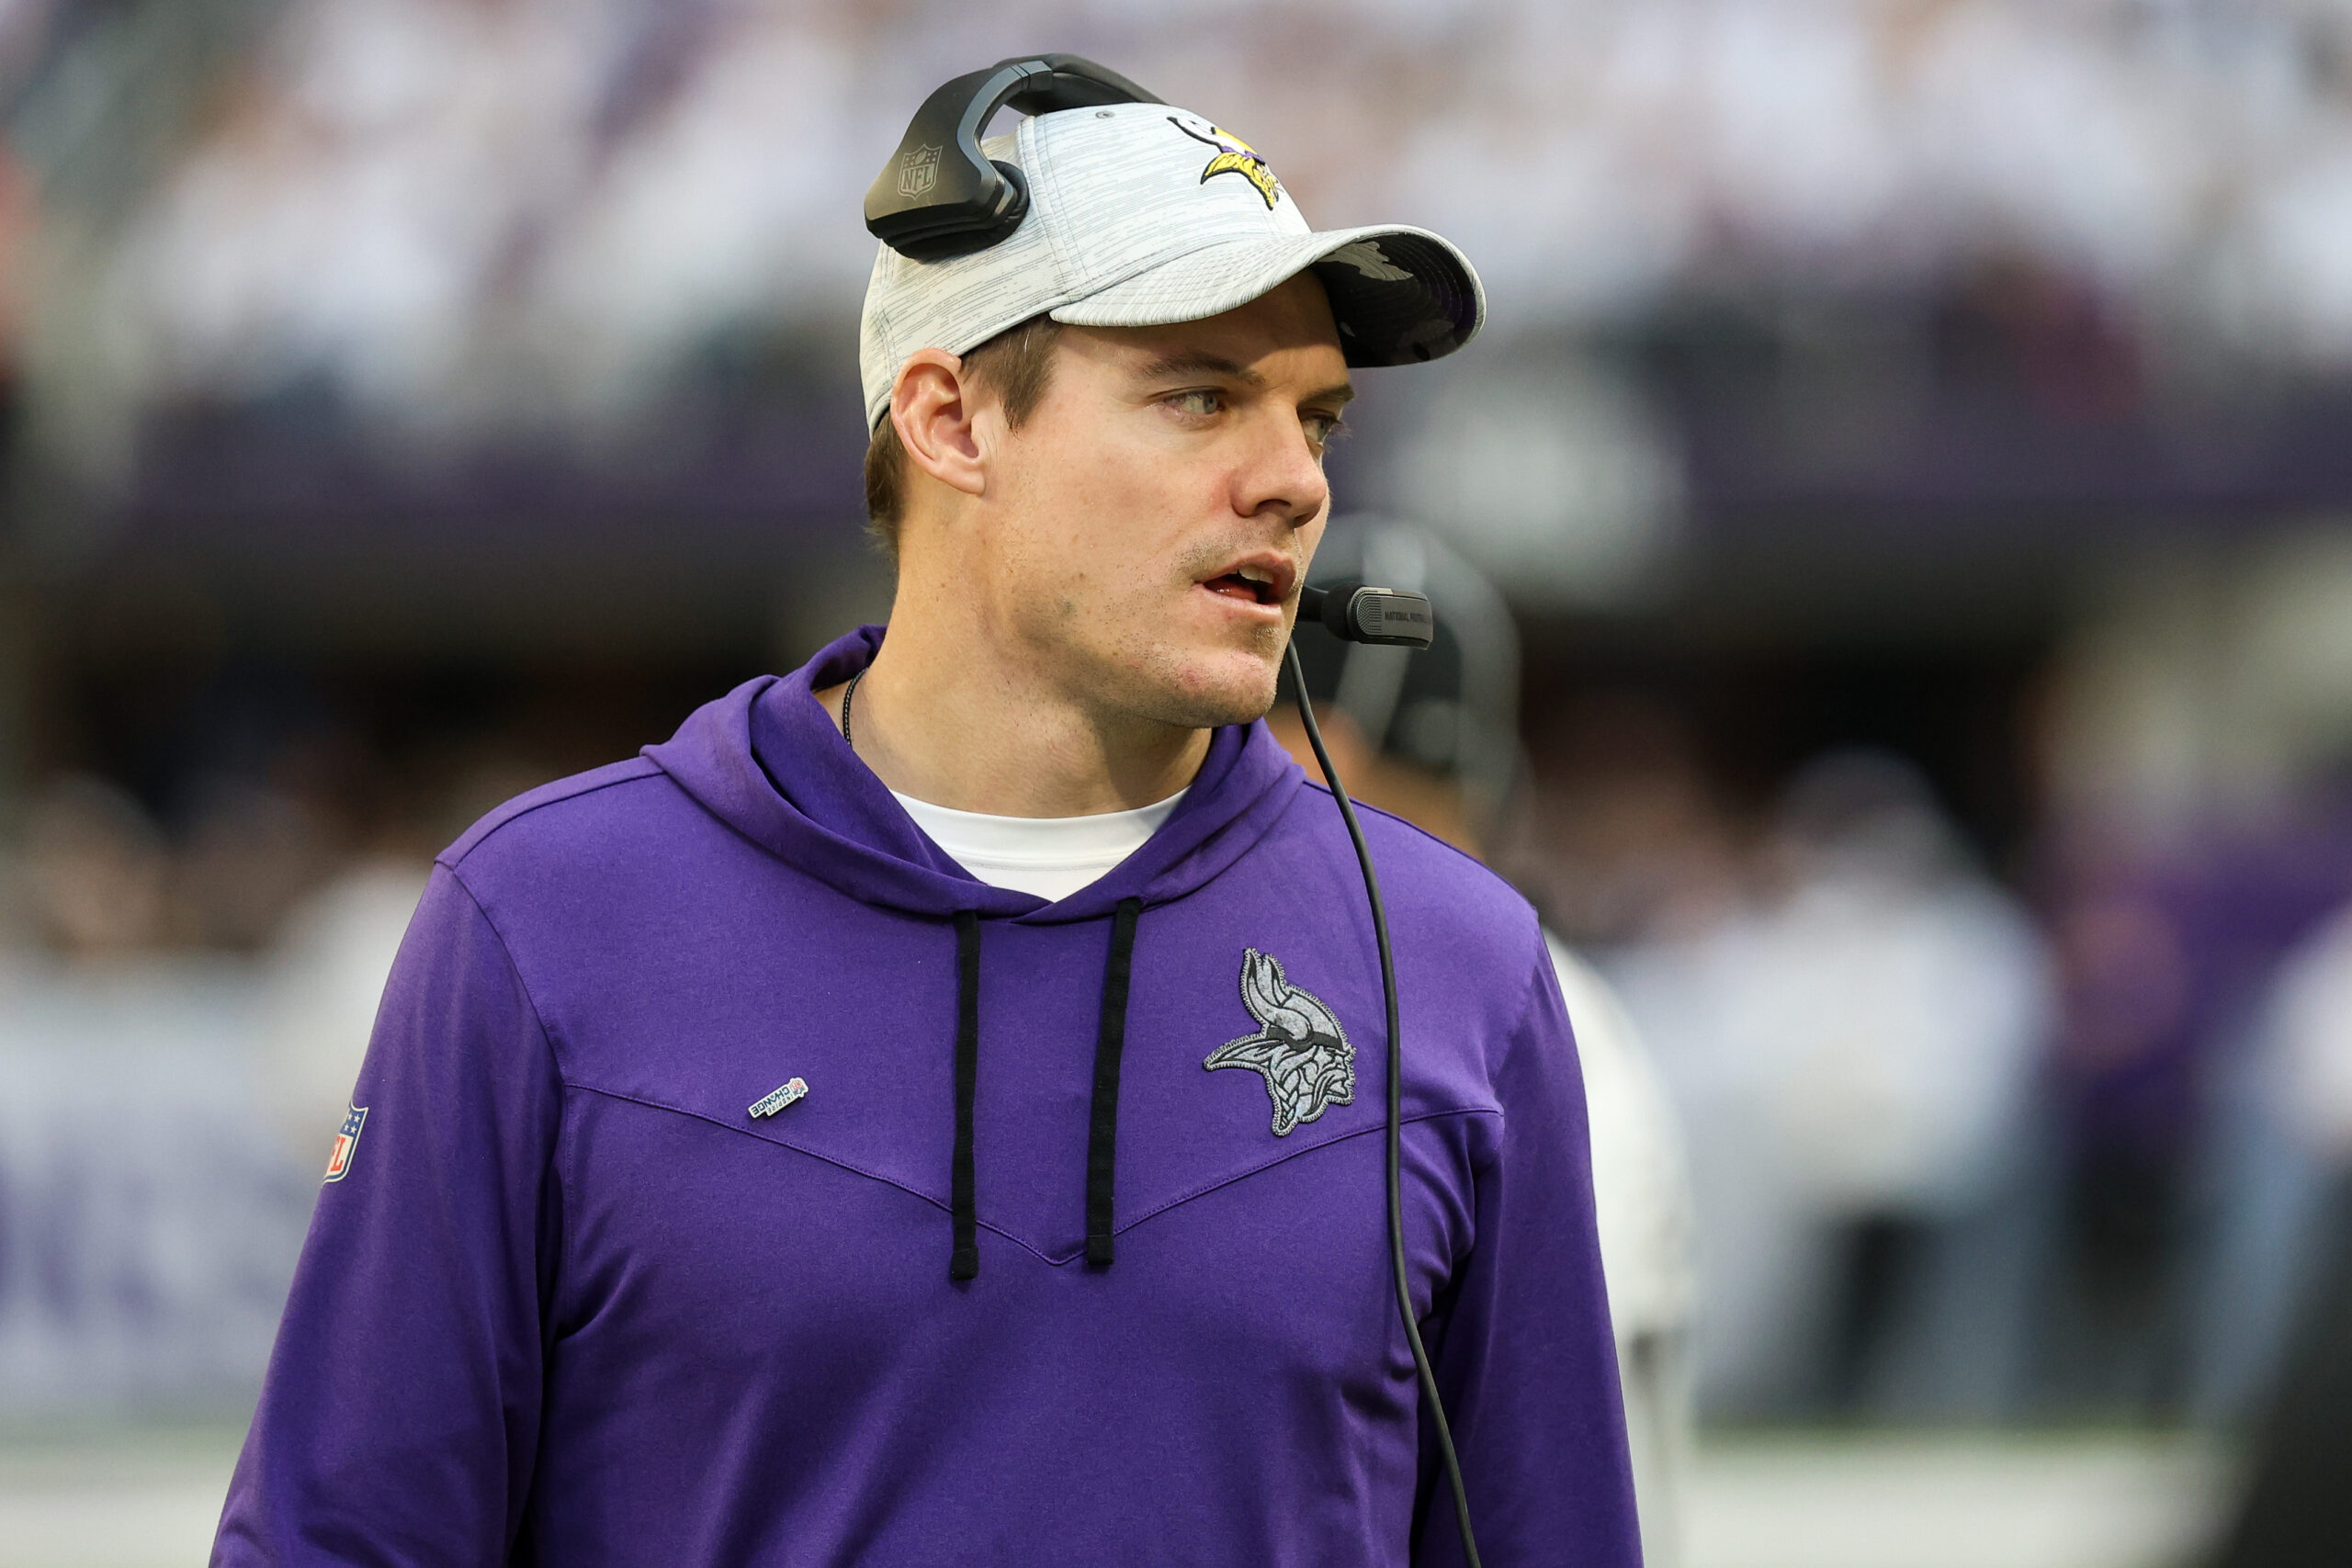 Minnesota Vikings 2023 offseason workout dates: First day of 2023 is April 17th